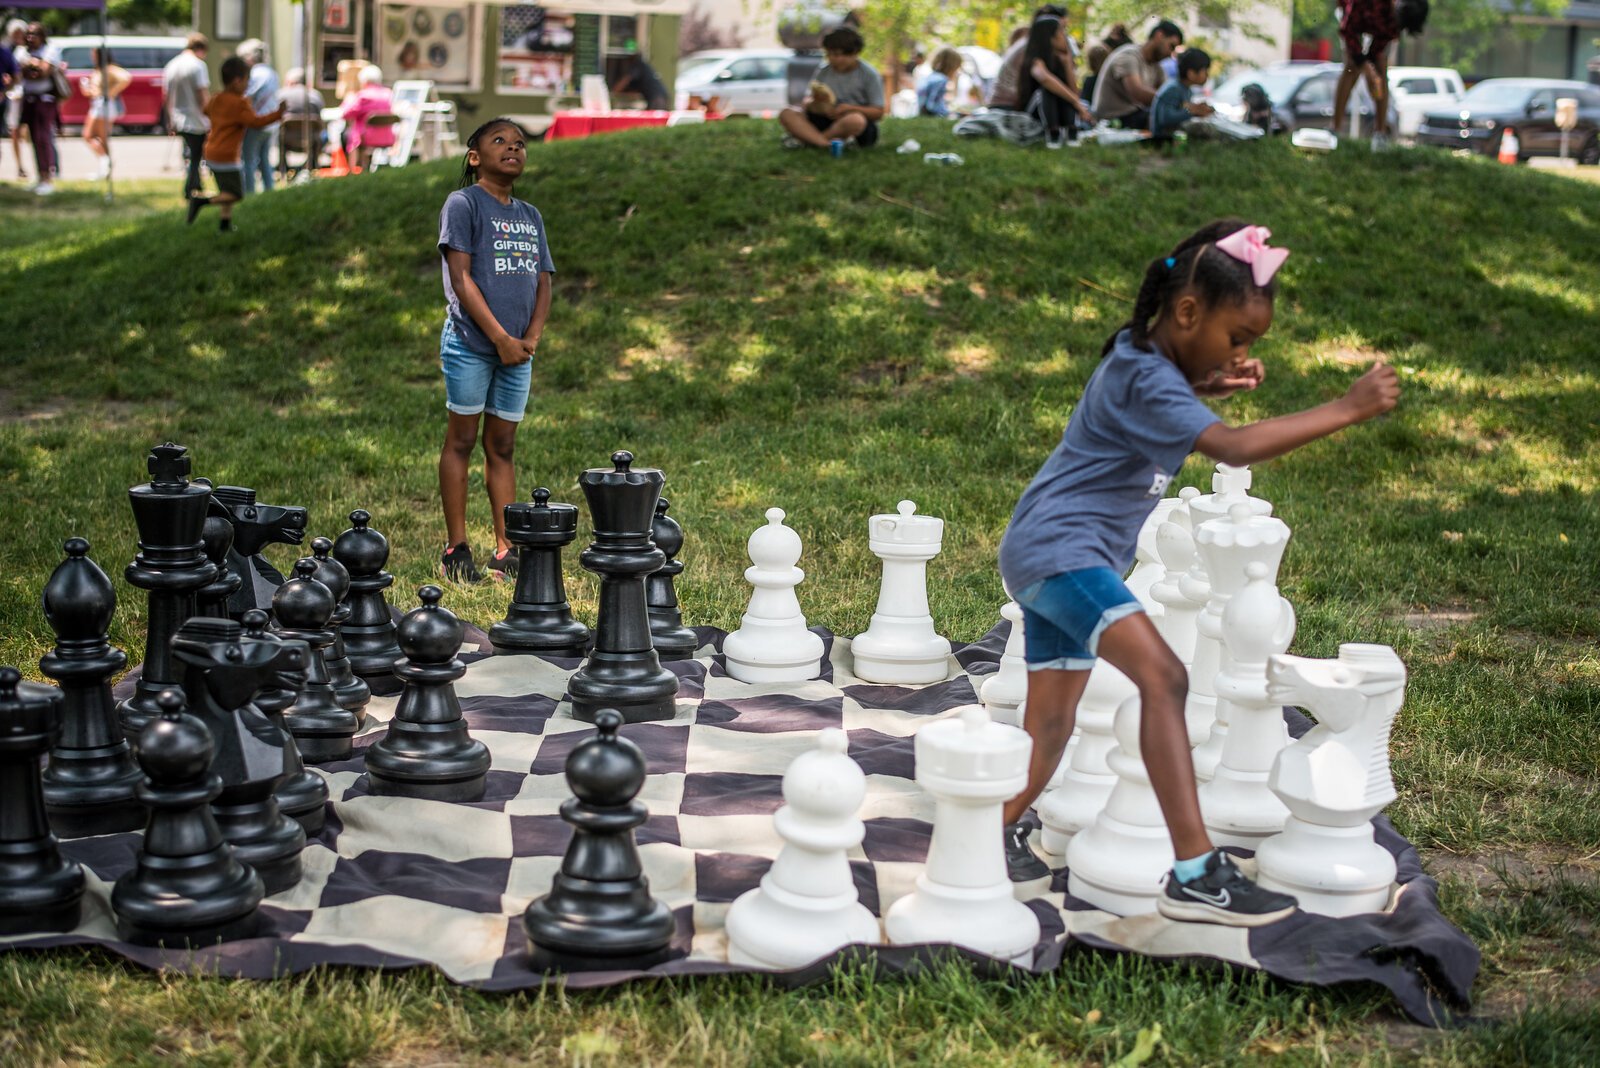 In Bronson Park in June, Fran caught these youth playing a game that was part hopscotch, part chess.